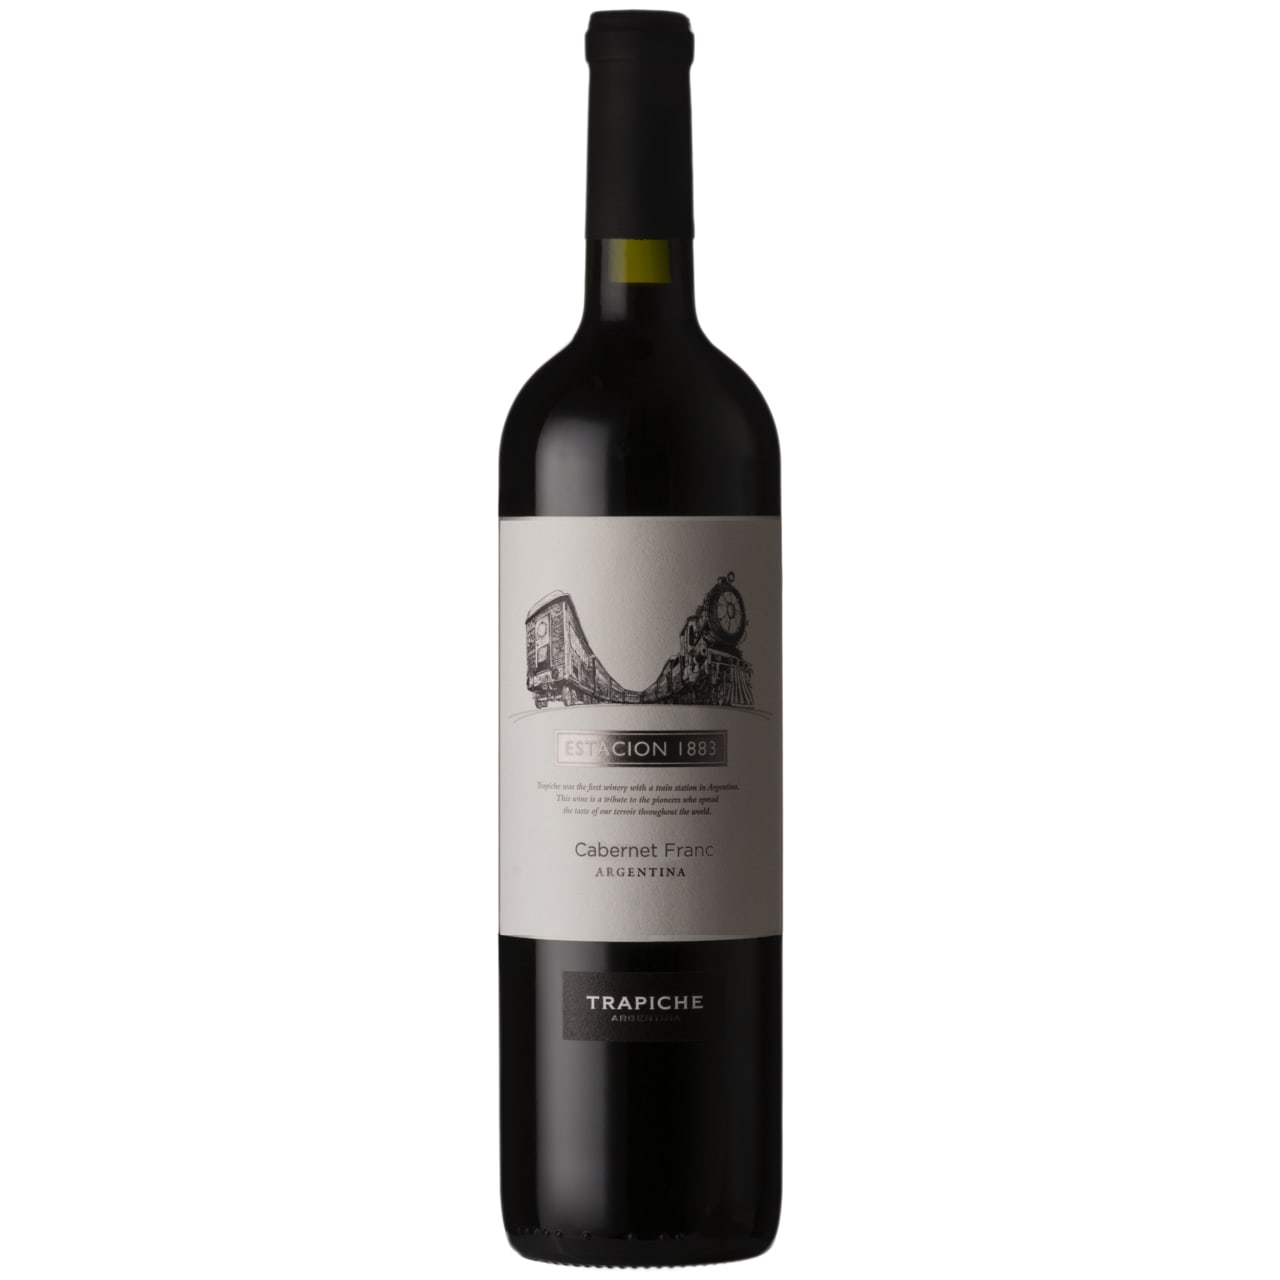 This Cabernet Franc has aromas of dark fruits such as blueberries and blackcurrants with hints of white pepper. It is smooth on the palate with soft tannins and a long lingering finish.